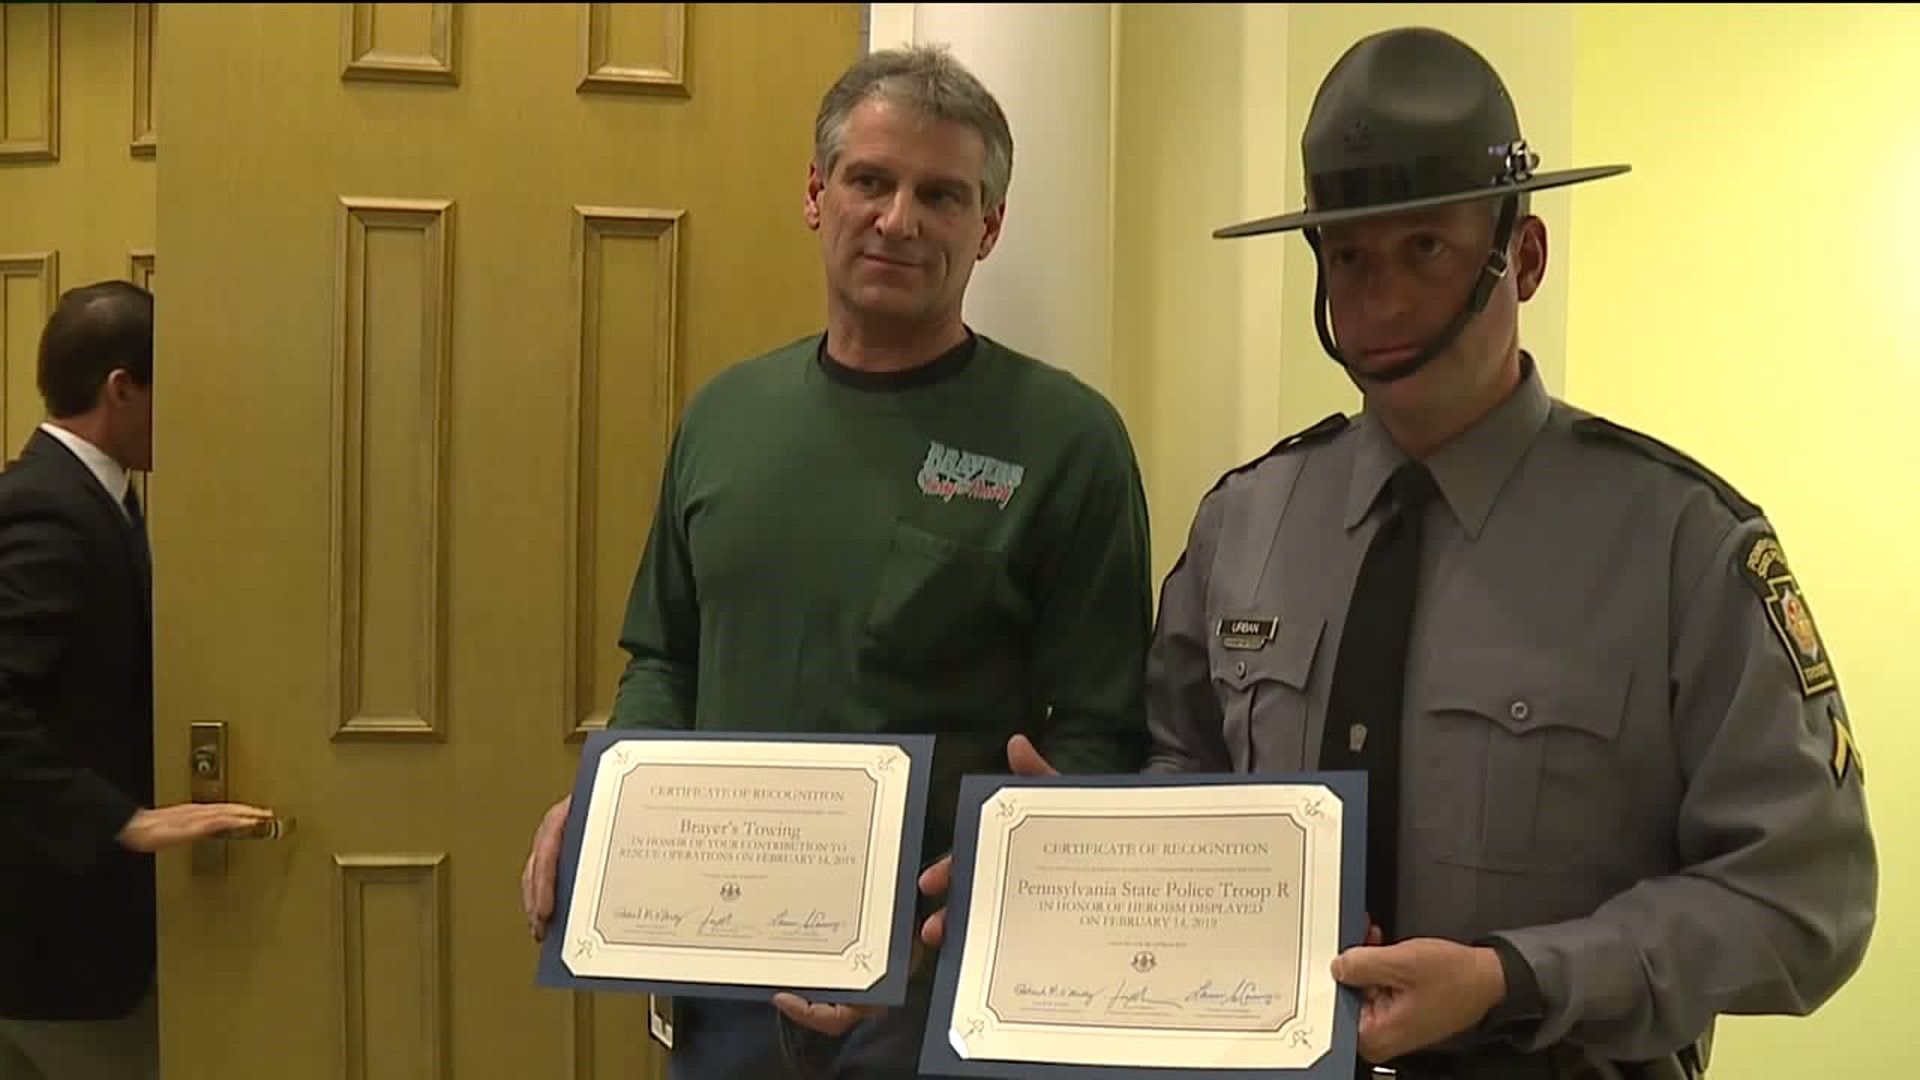 Rescuers Honored for Freeing Trapped Tractor Trailer Driver